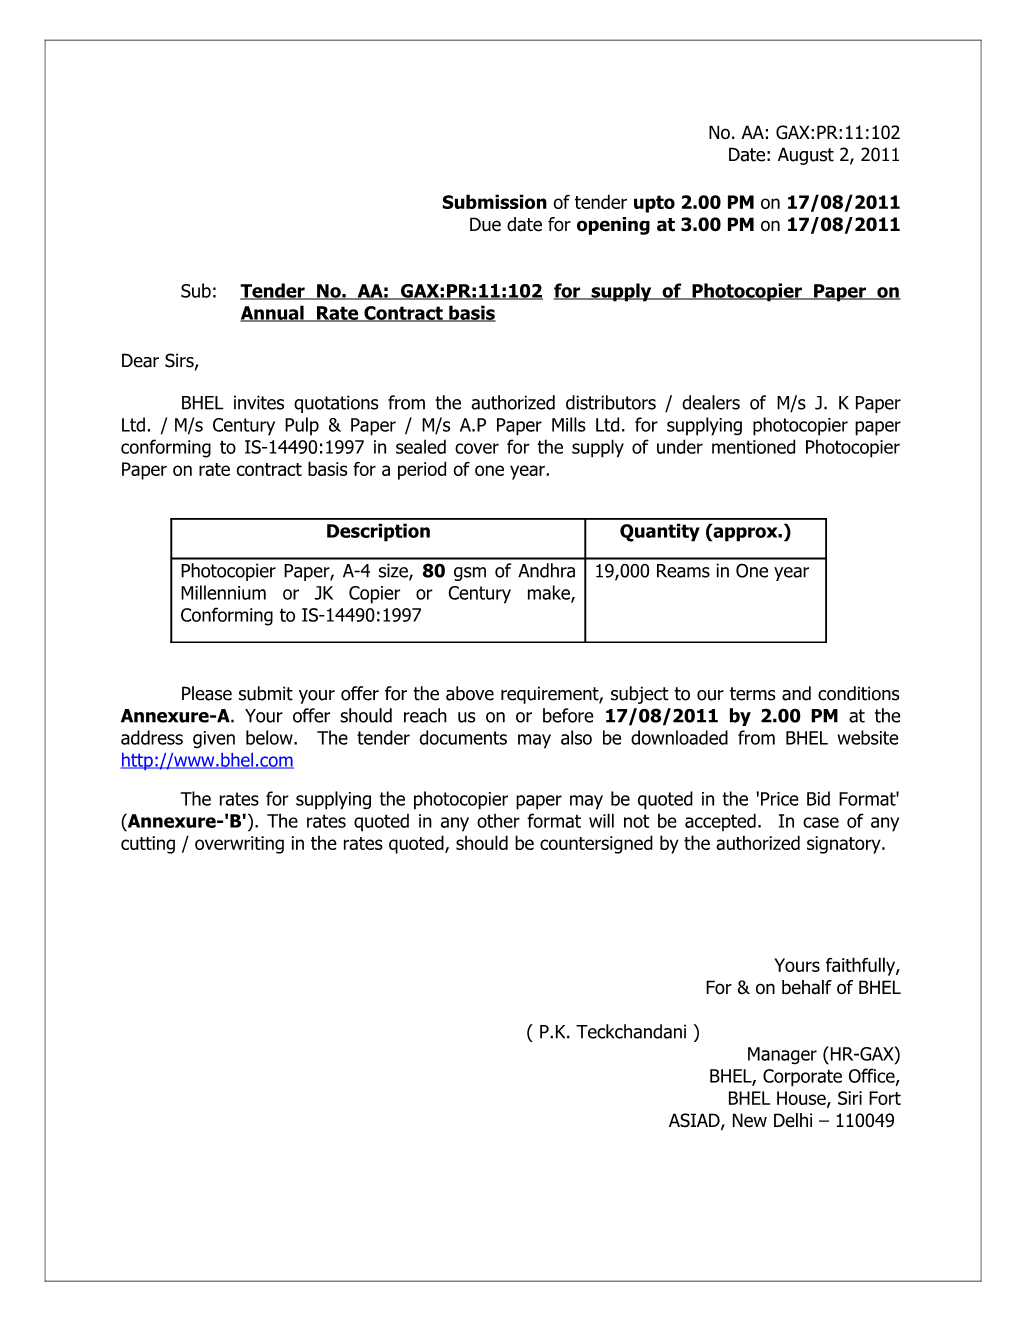 Submission of Tender Upto 2.00 PM on 17/08/2011